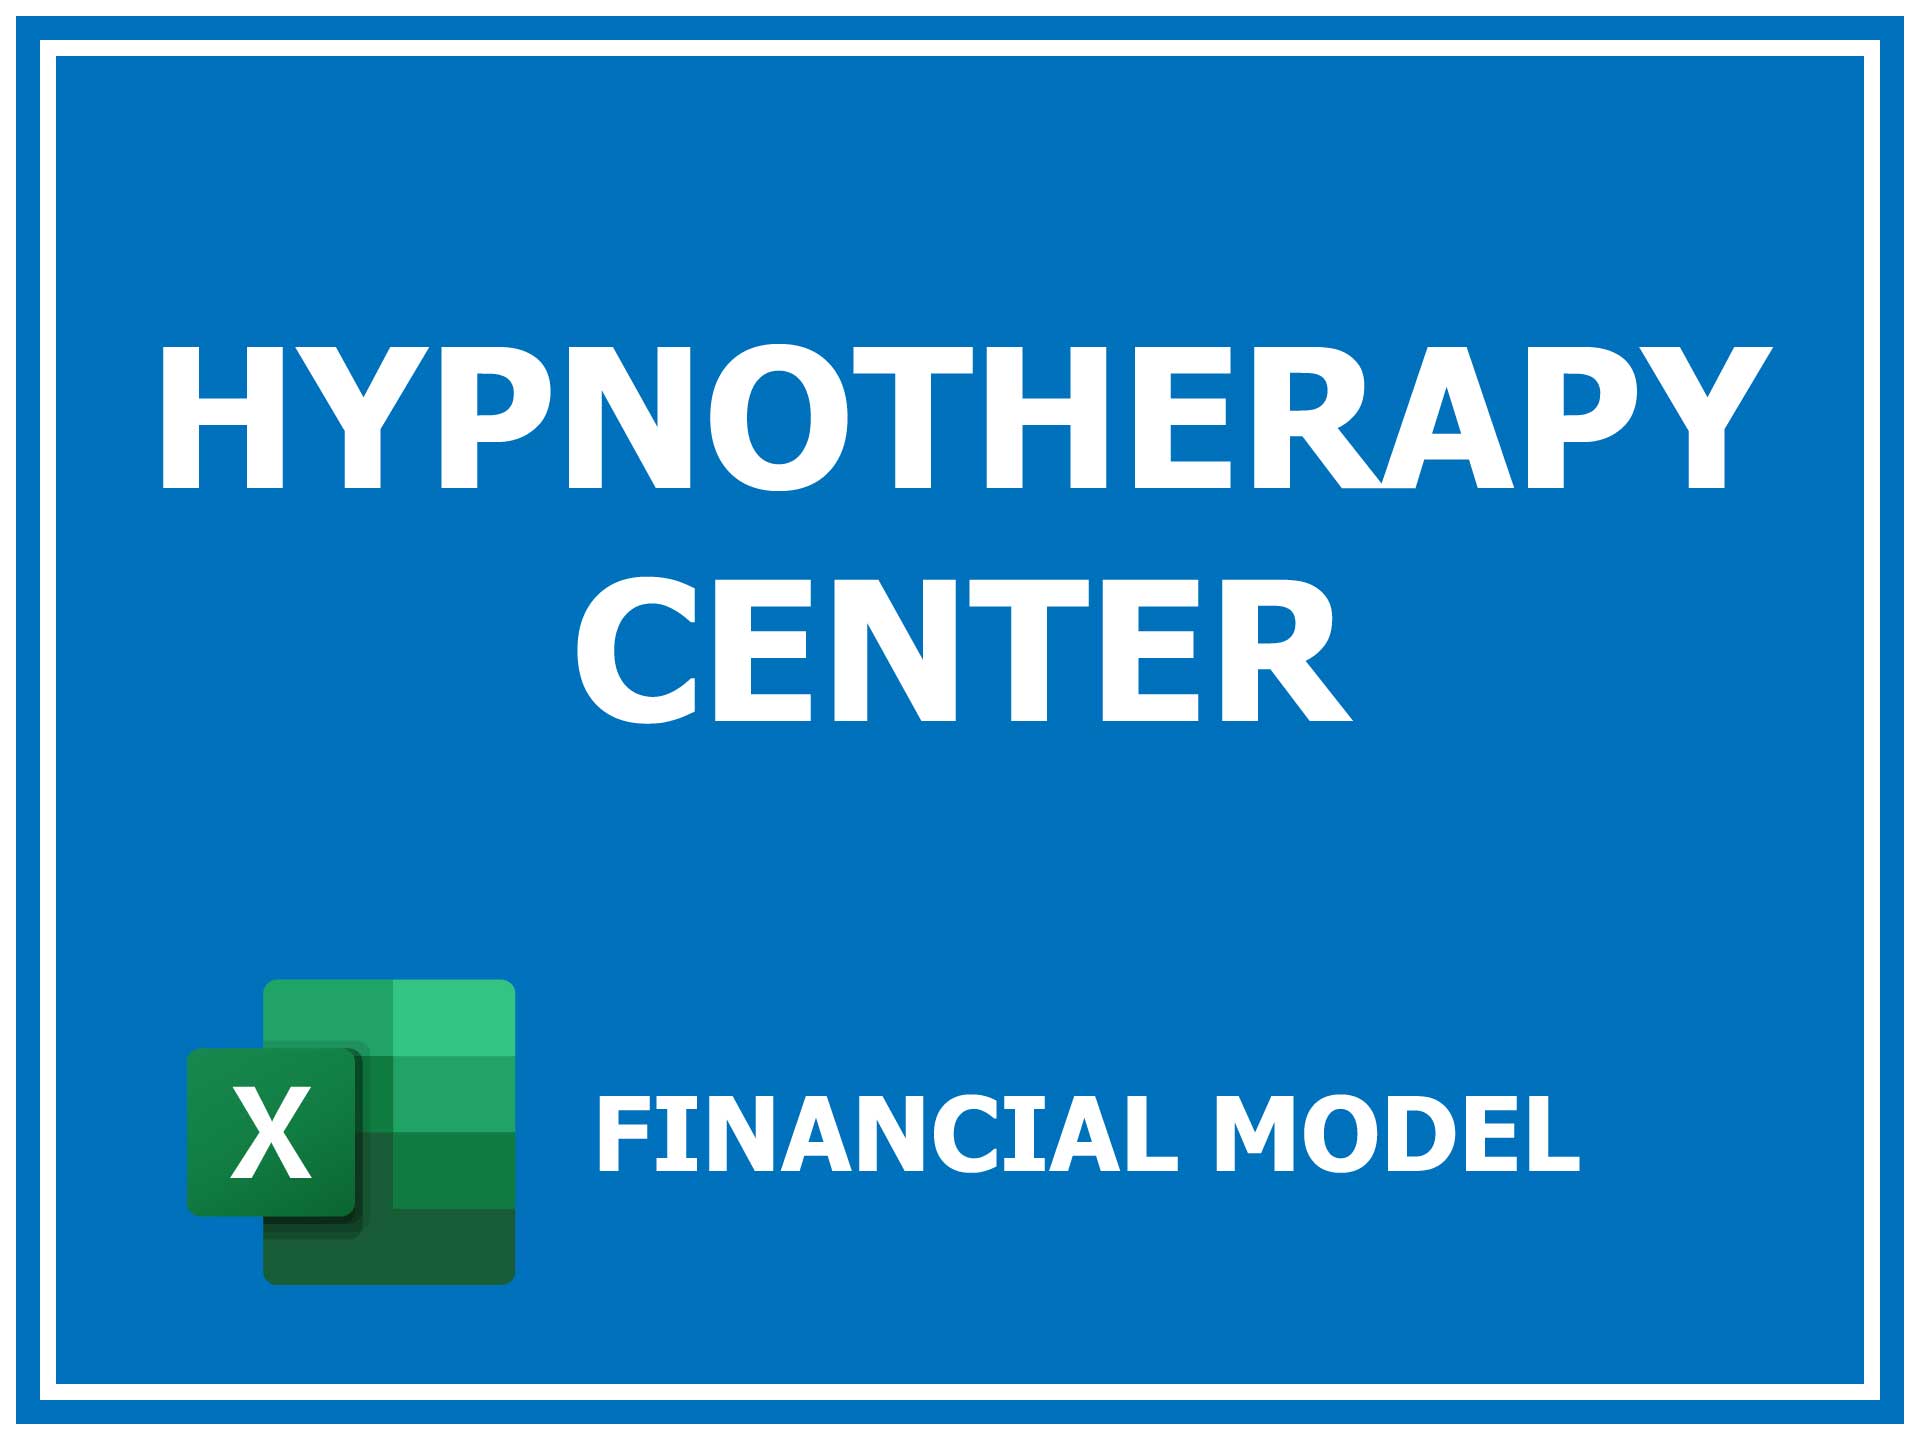 Hypnotherapy Center